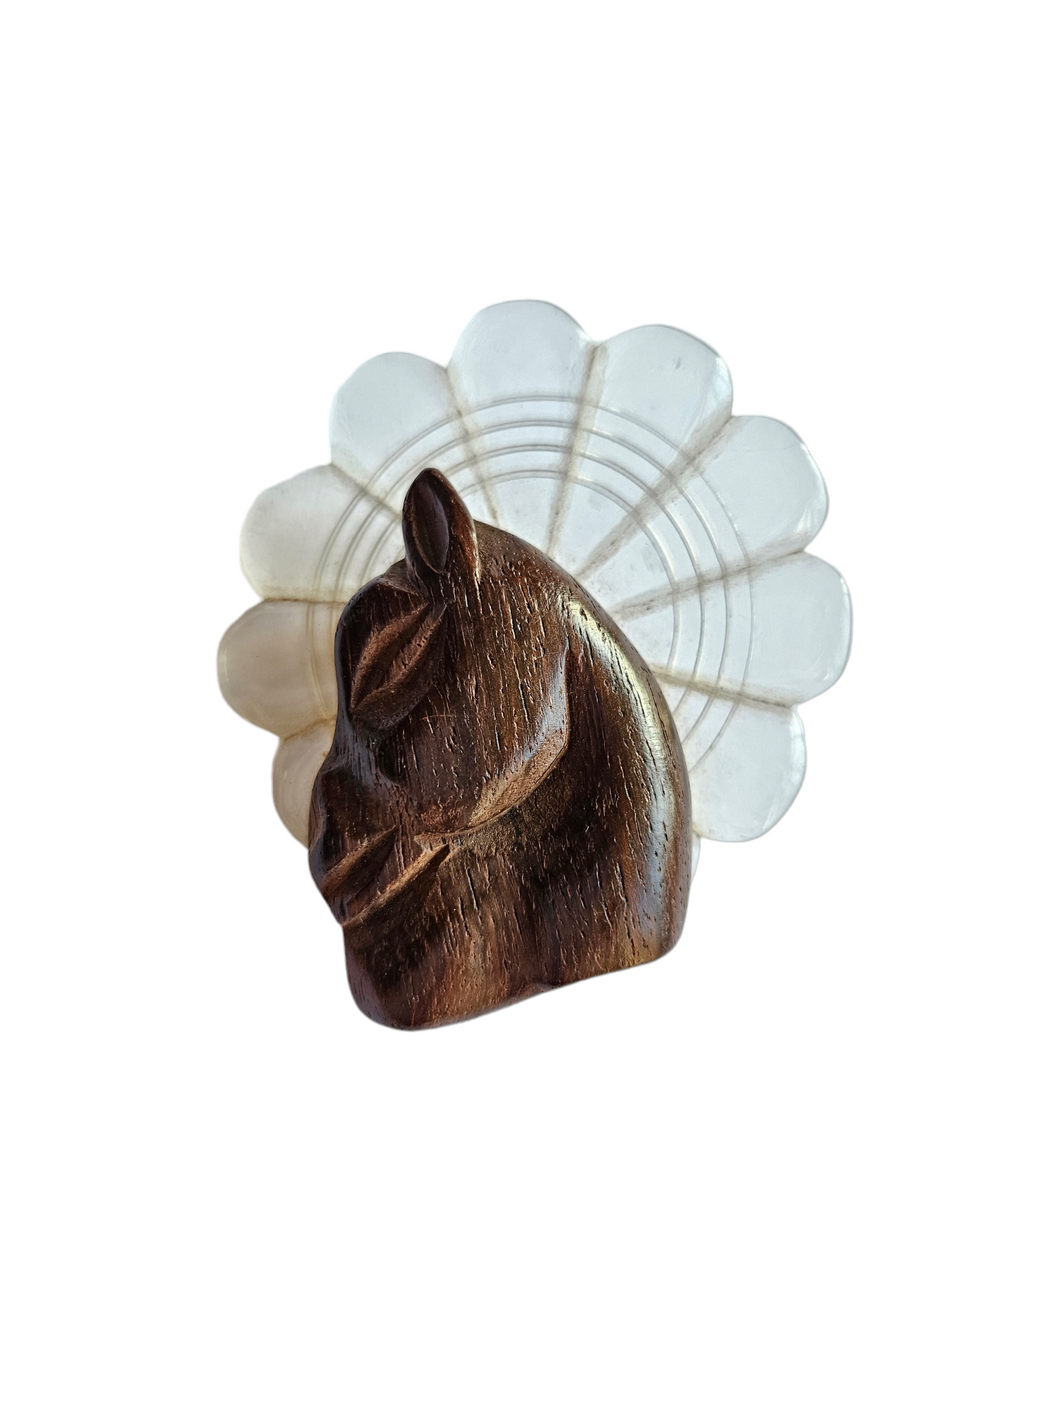 1940s Carved Wood and Lucite Elzac Horse Brooch